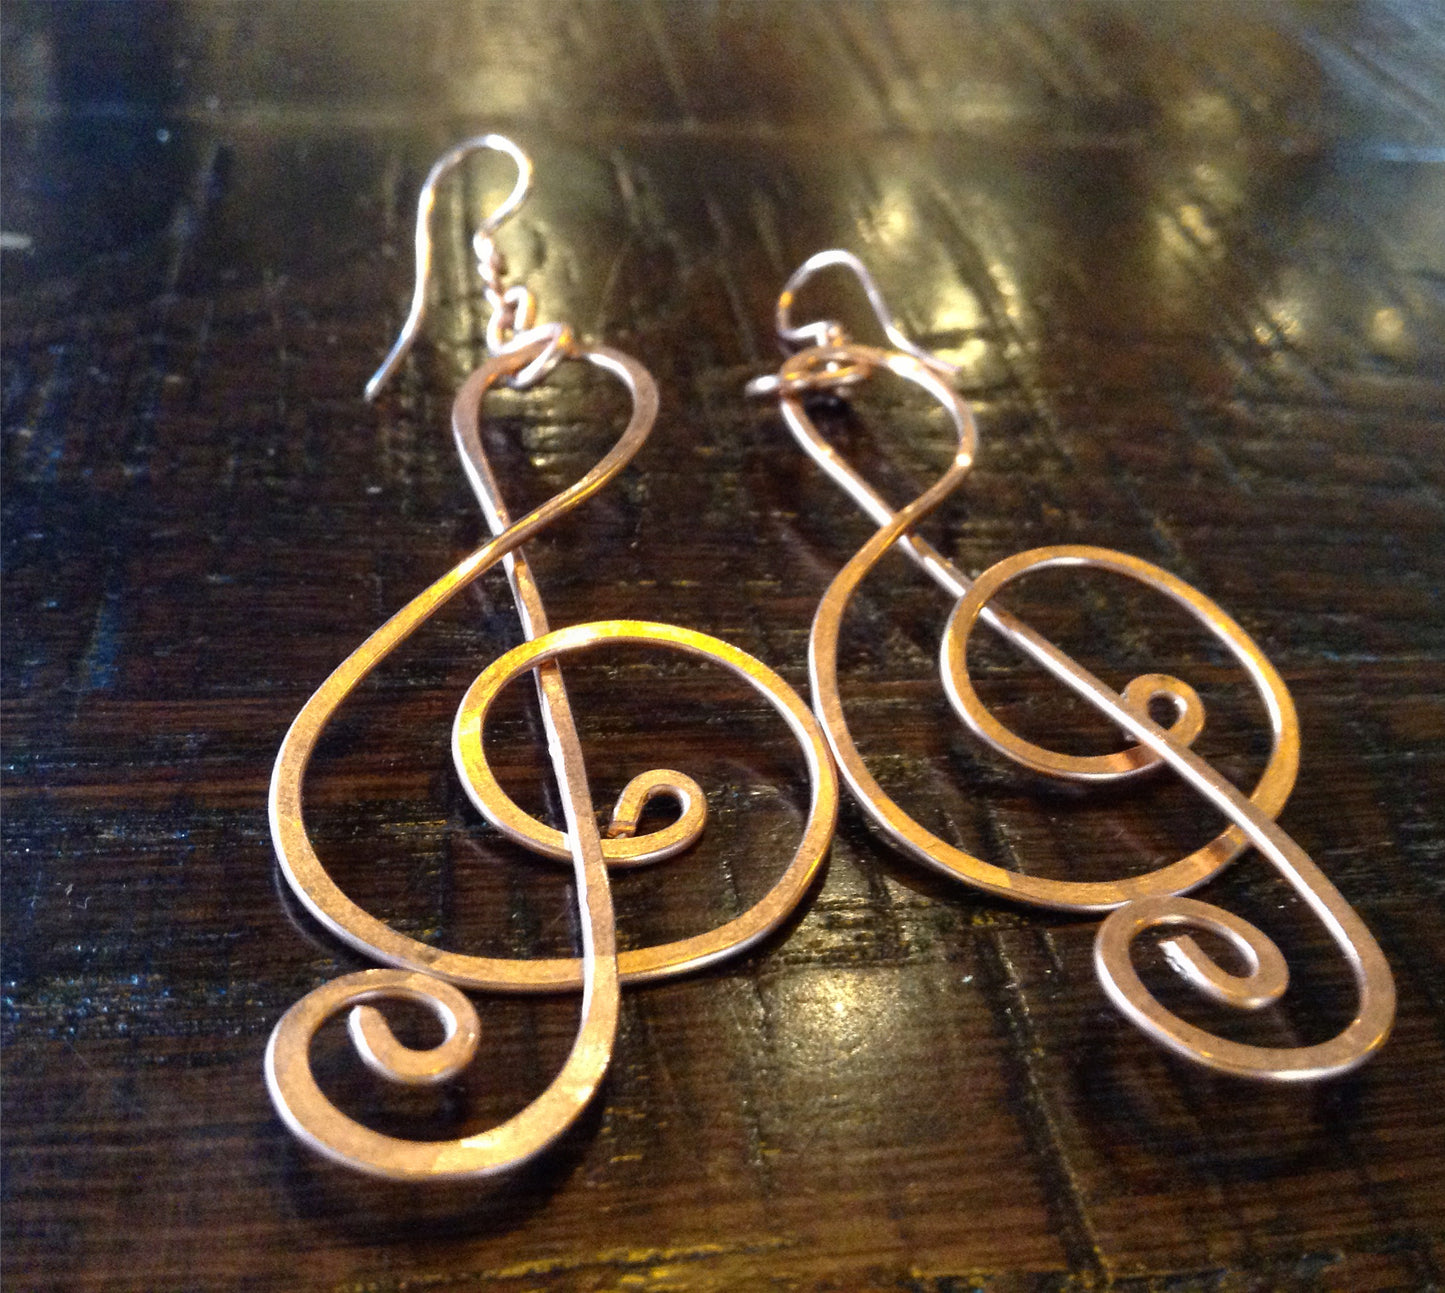 BRONZE "MUSIC TO MY SOL" TREBLE CLEF EARRINGS